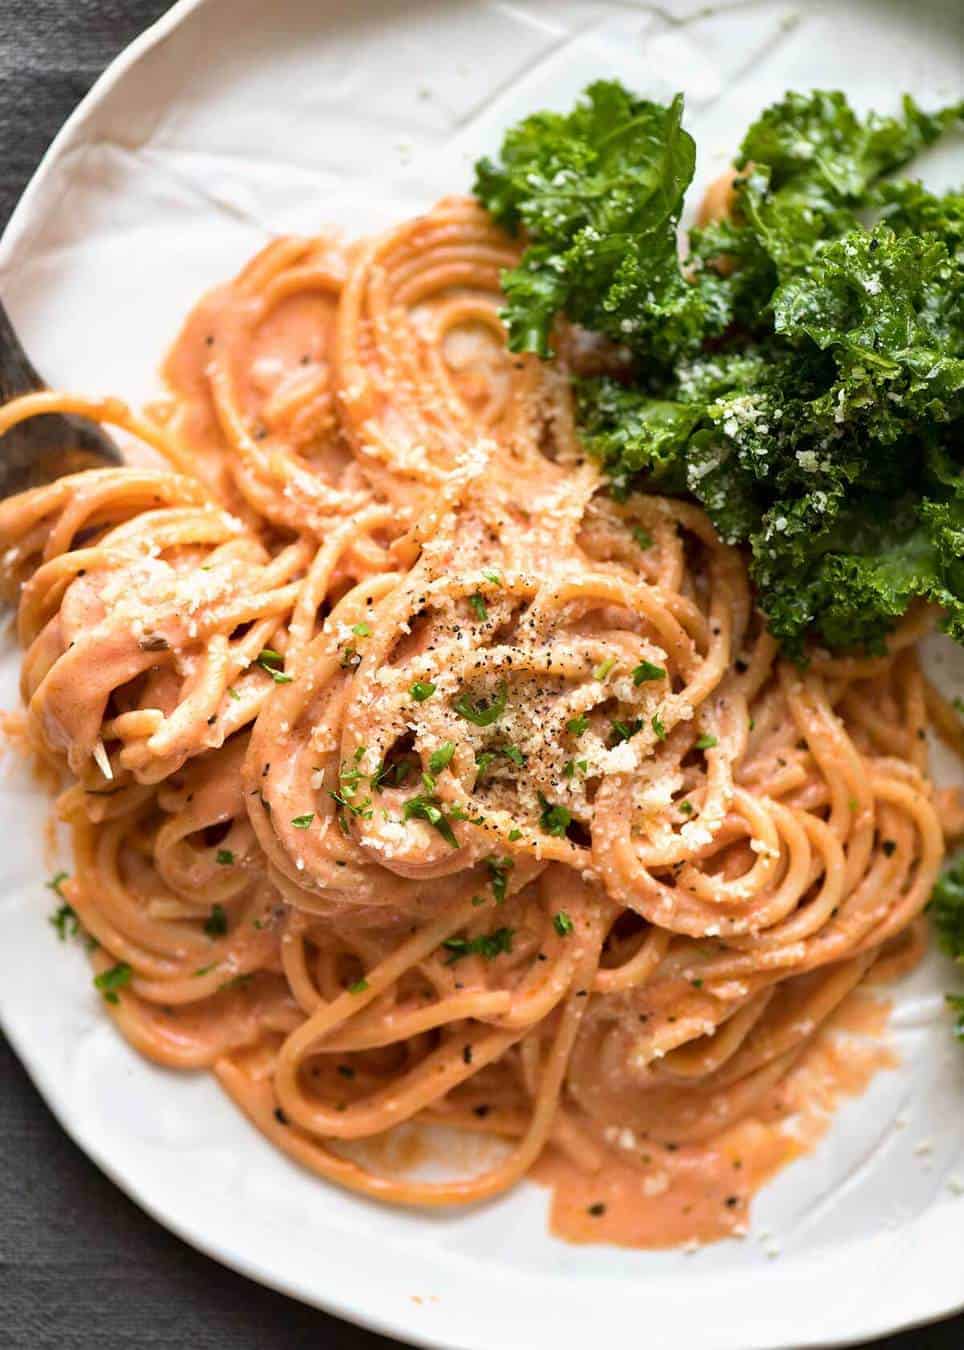 Creamy Tomato Pasta - a less guilty way to get your creamy pasta fix, this luscious sauce is made with tomato, milk, parmesan, garlic and cream.